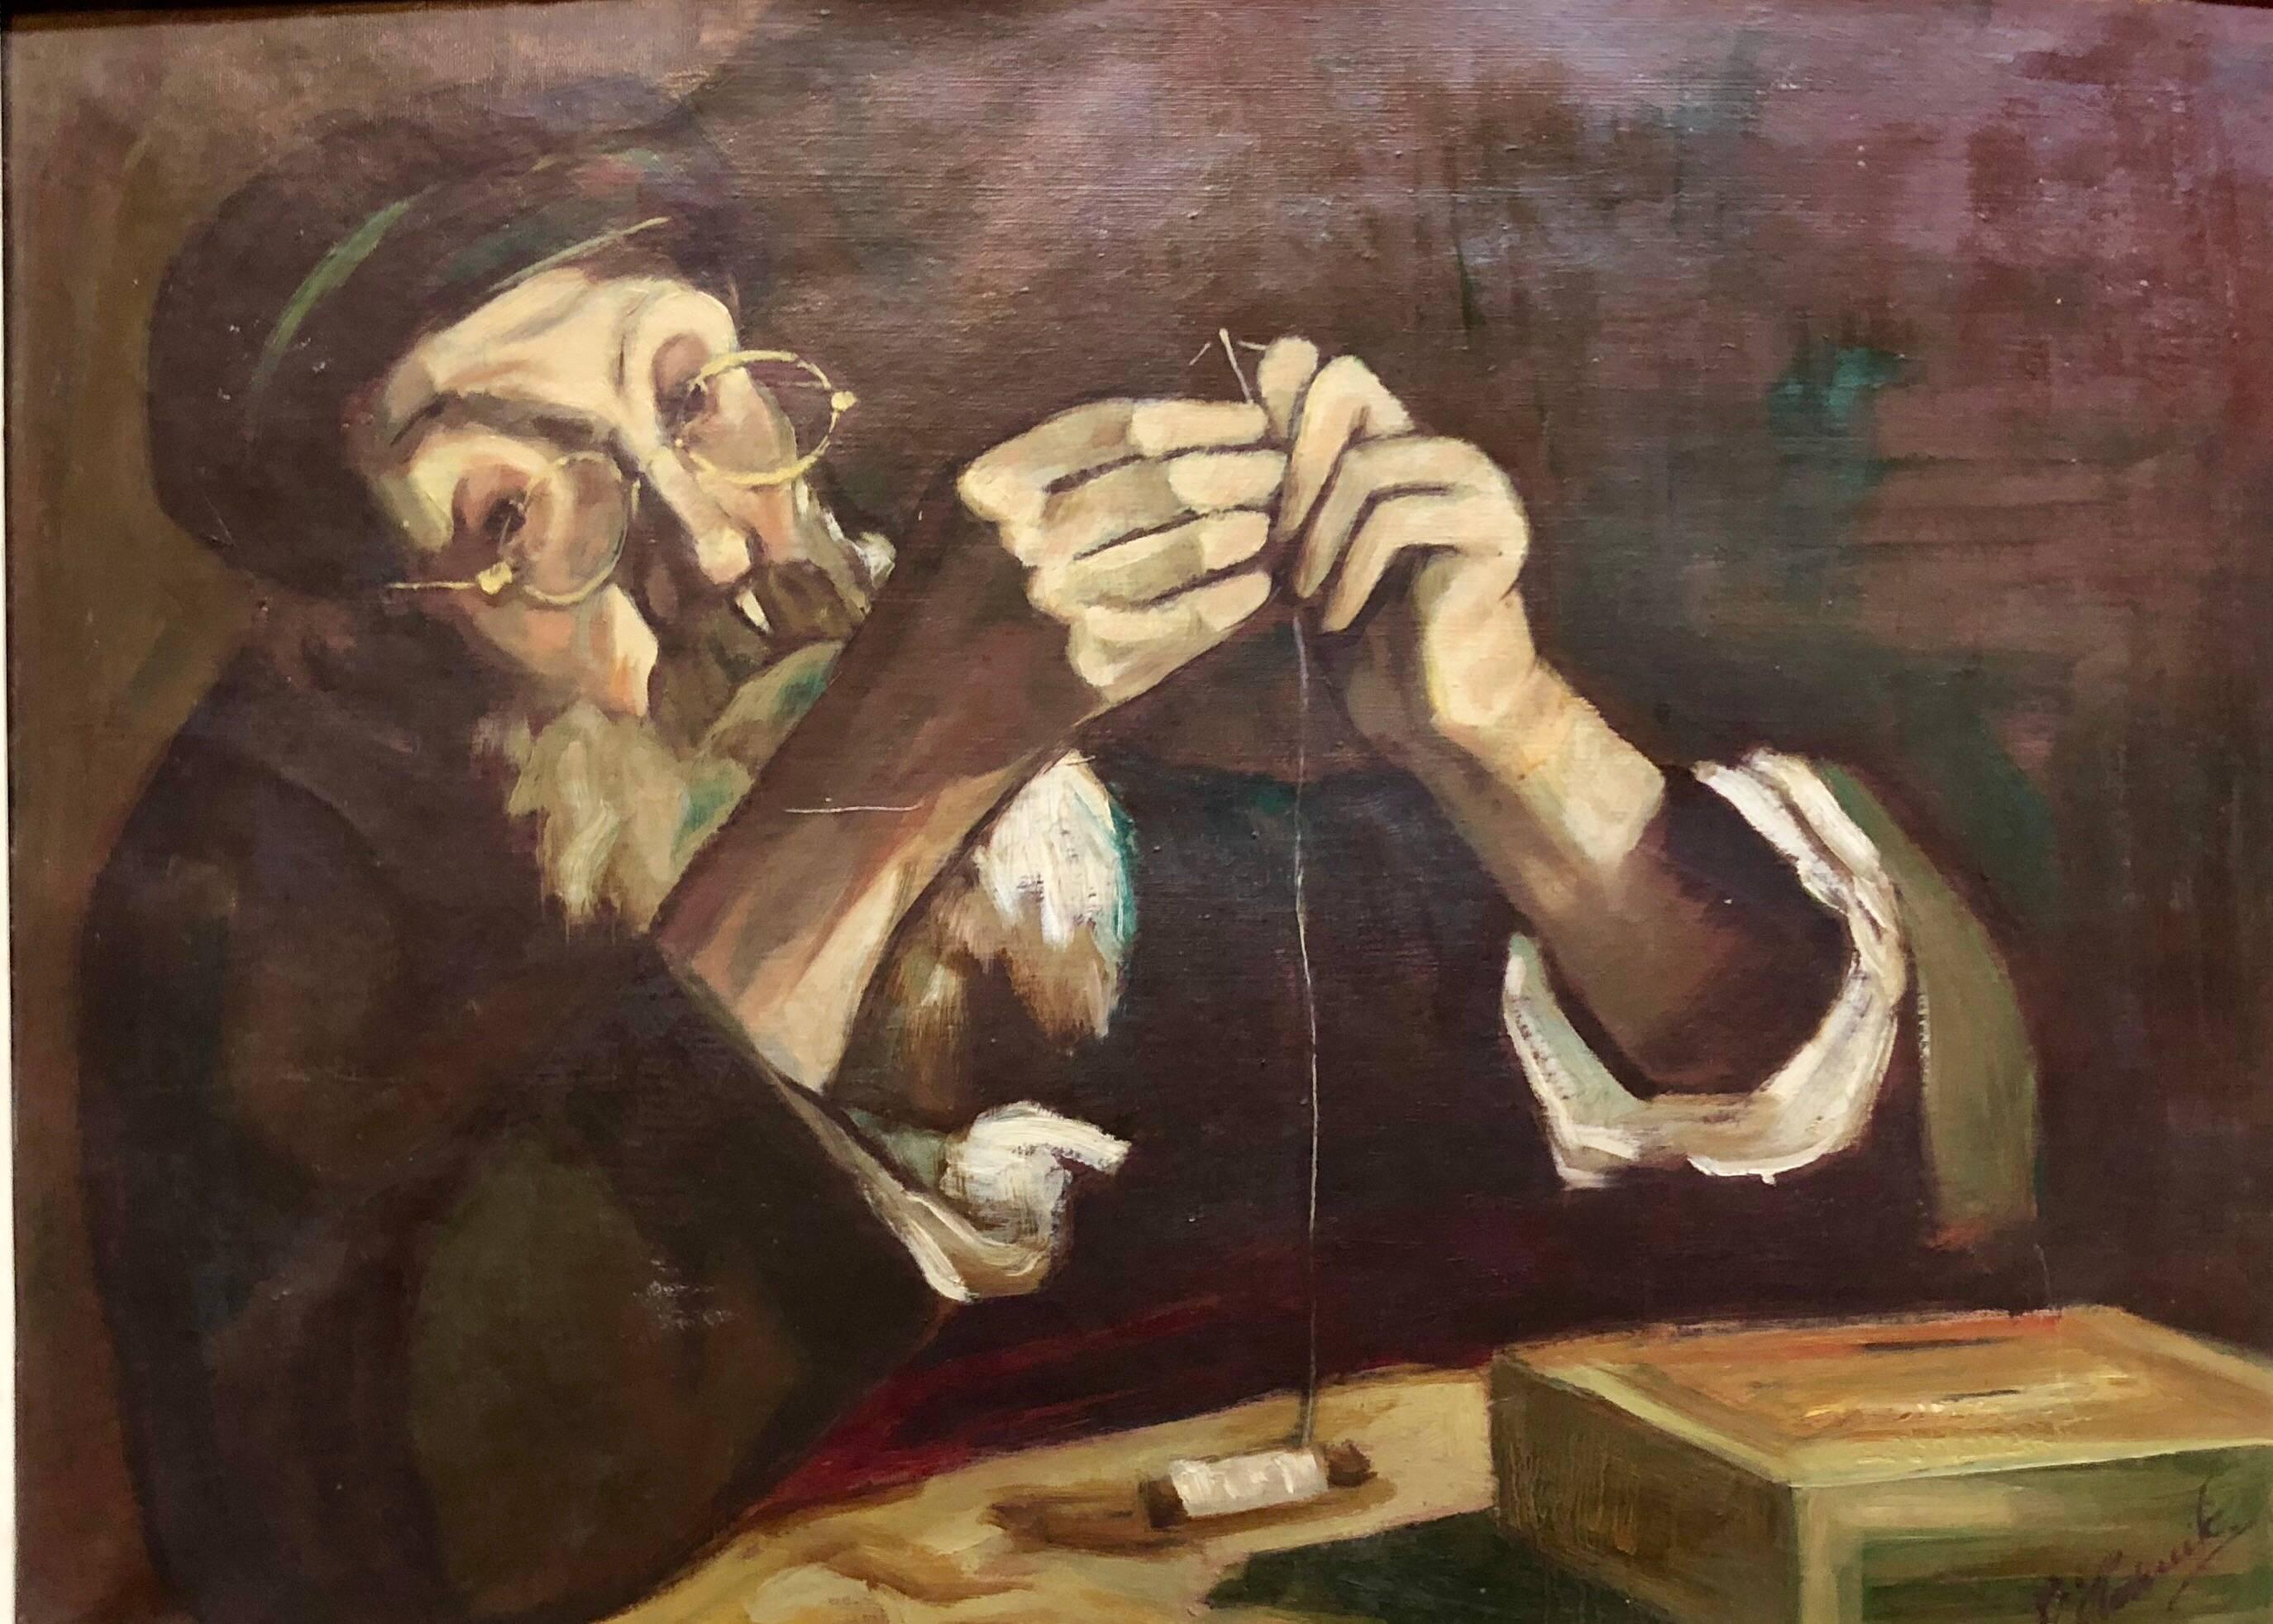 Older, realistic portrait of an older Jewish shtetl tailor by Polish artist. Here the artist conveys a sense of quiet grandeur through the eyes of his subject and the way it's rendered. Part of a distinguished European lineage of Jewish genre